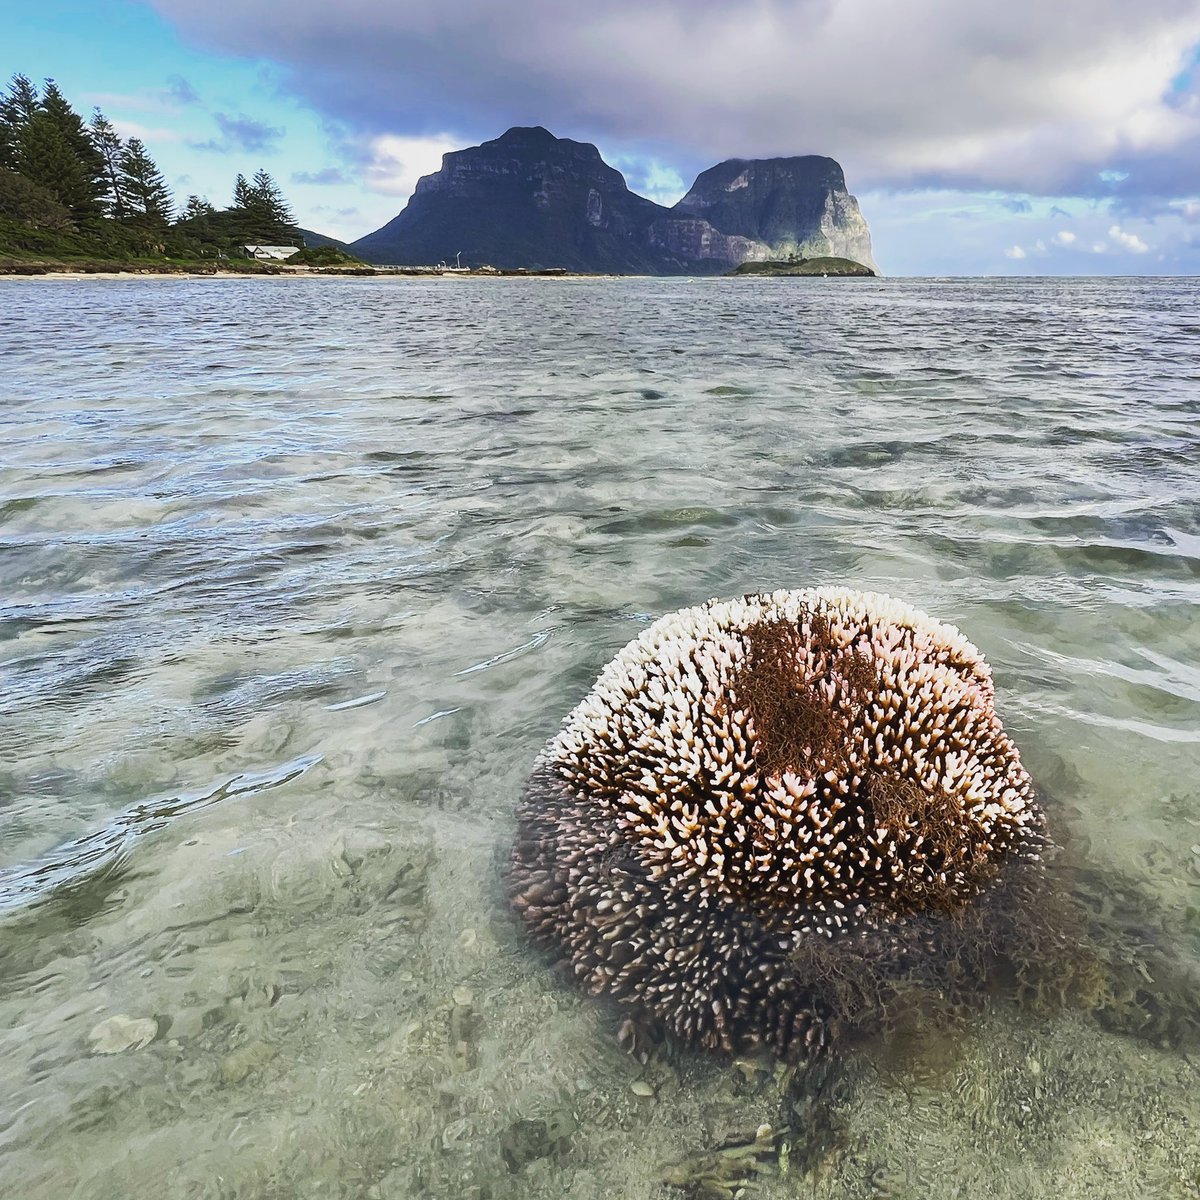 The world’s most southerly #CoralReef is at #LordHoweIsland. Earlier this year, the reef was lucky to escape most of the #bleaching associated with #OceanWarming. Sadly, the situation changed this week…